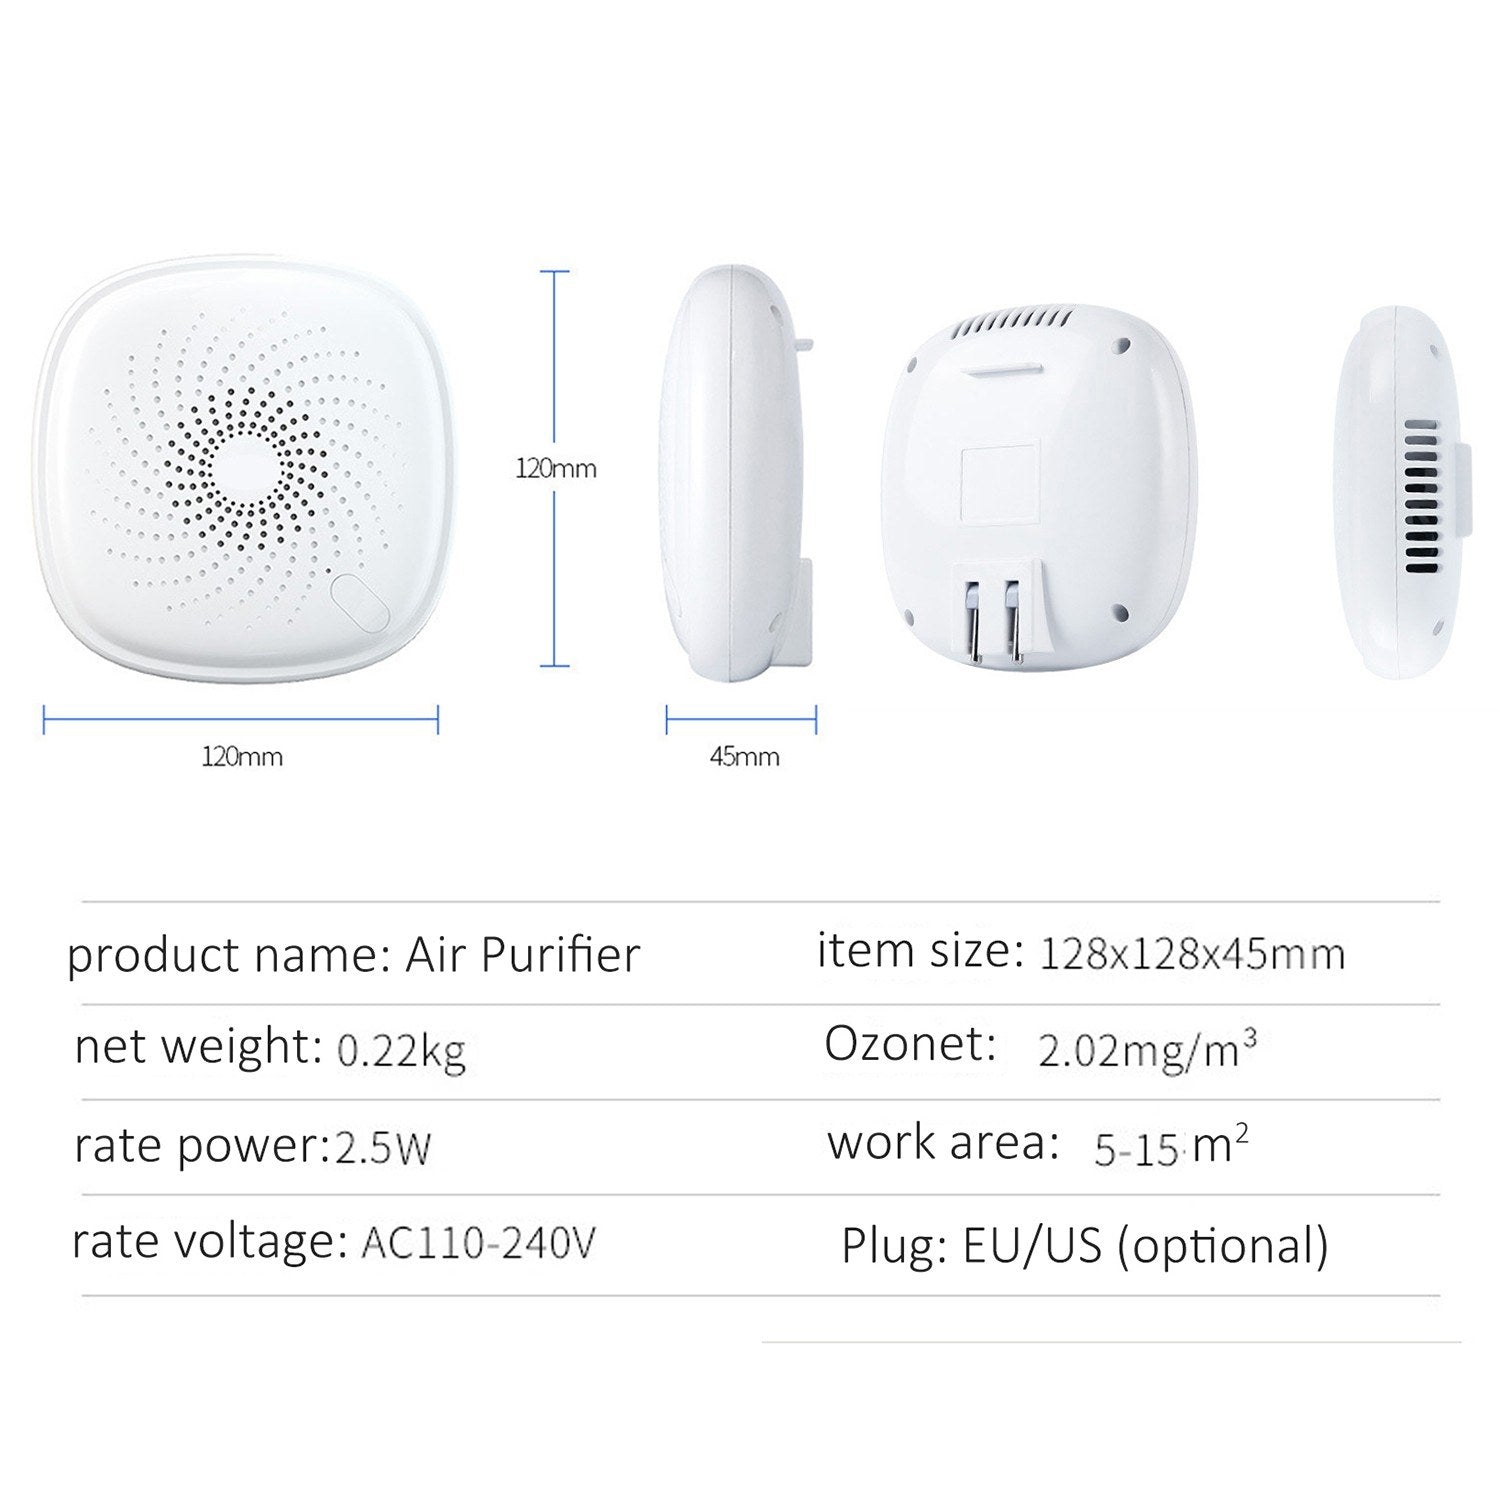 2-in-1 Plug-in Mini Ionizer Air Purifier Ozone Generator Deodorizer Portable Air Cleaner Odor Eliminator for Rooms Smoke and Pets AC100-240V